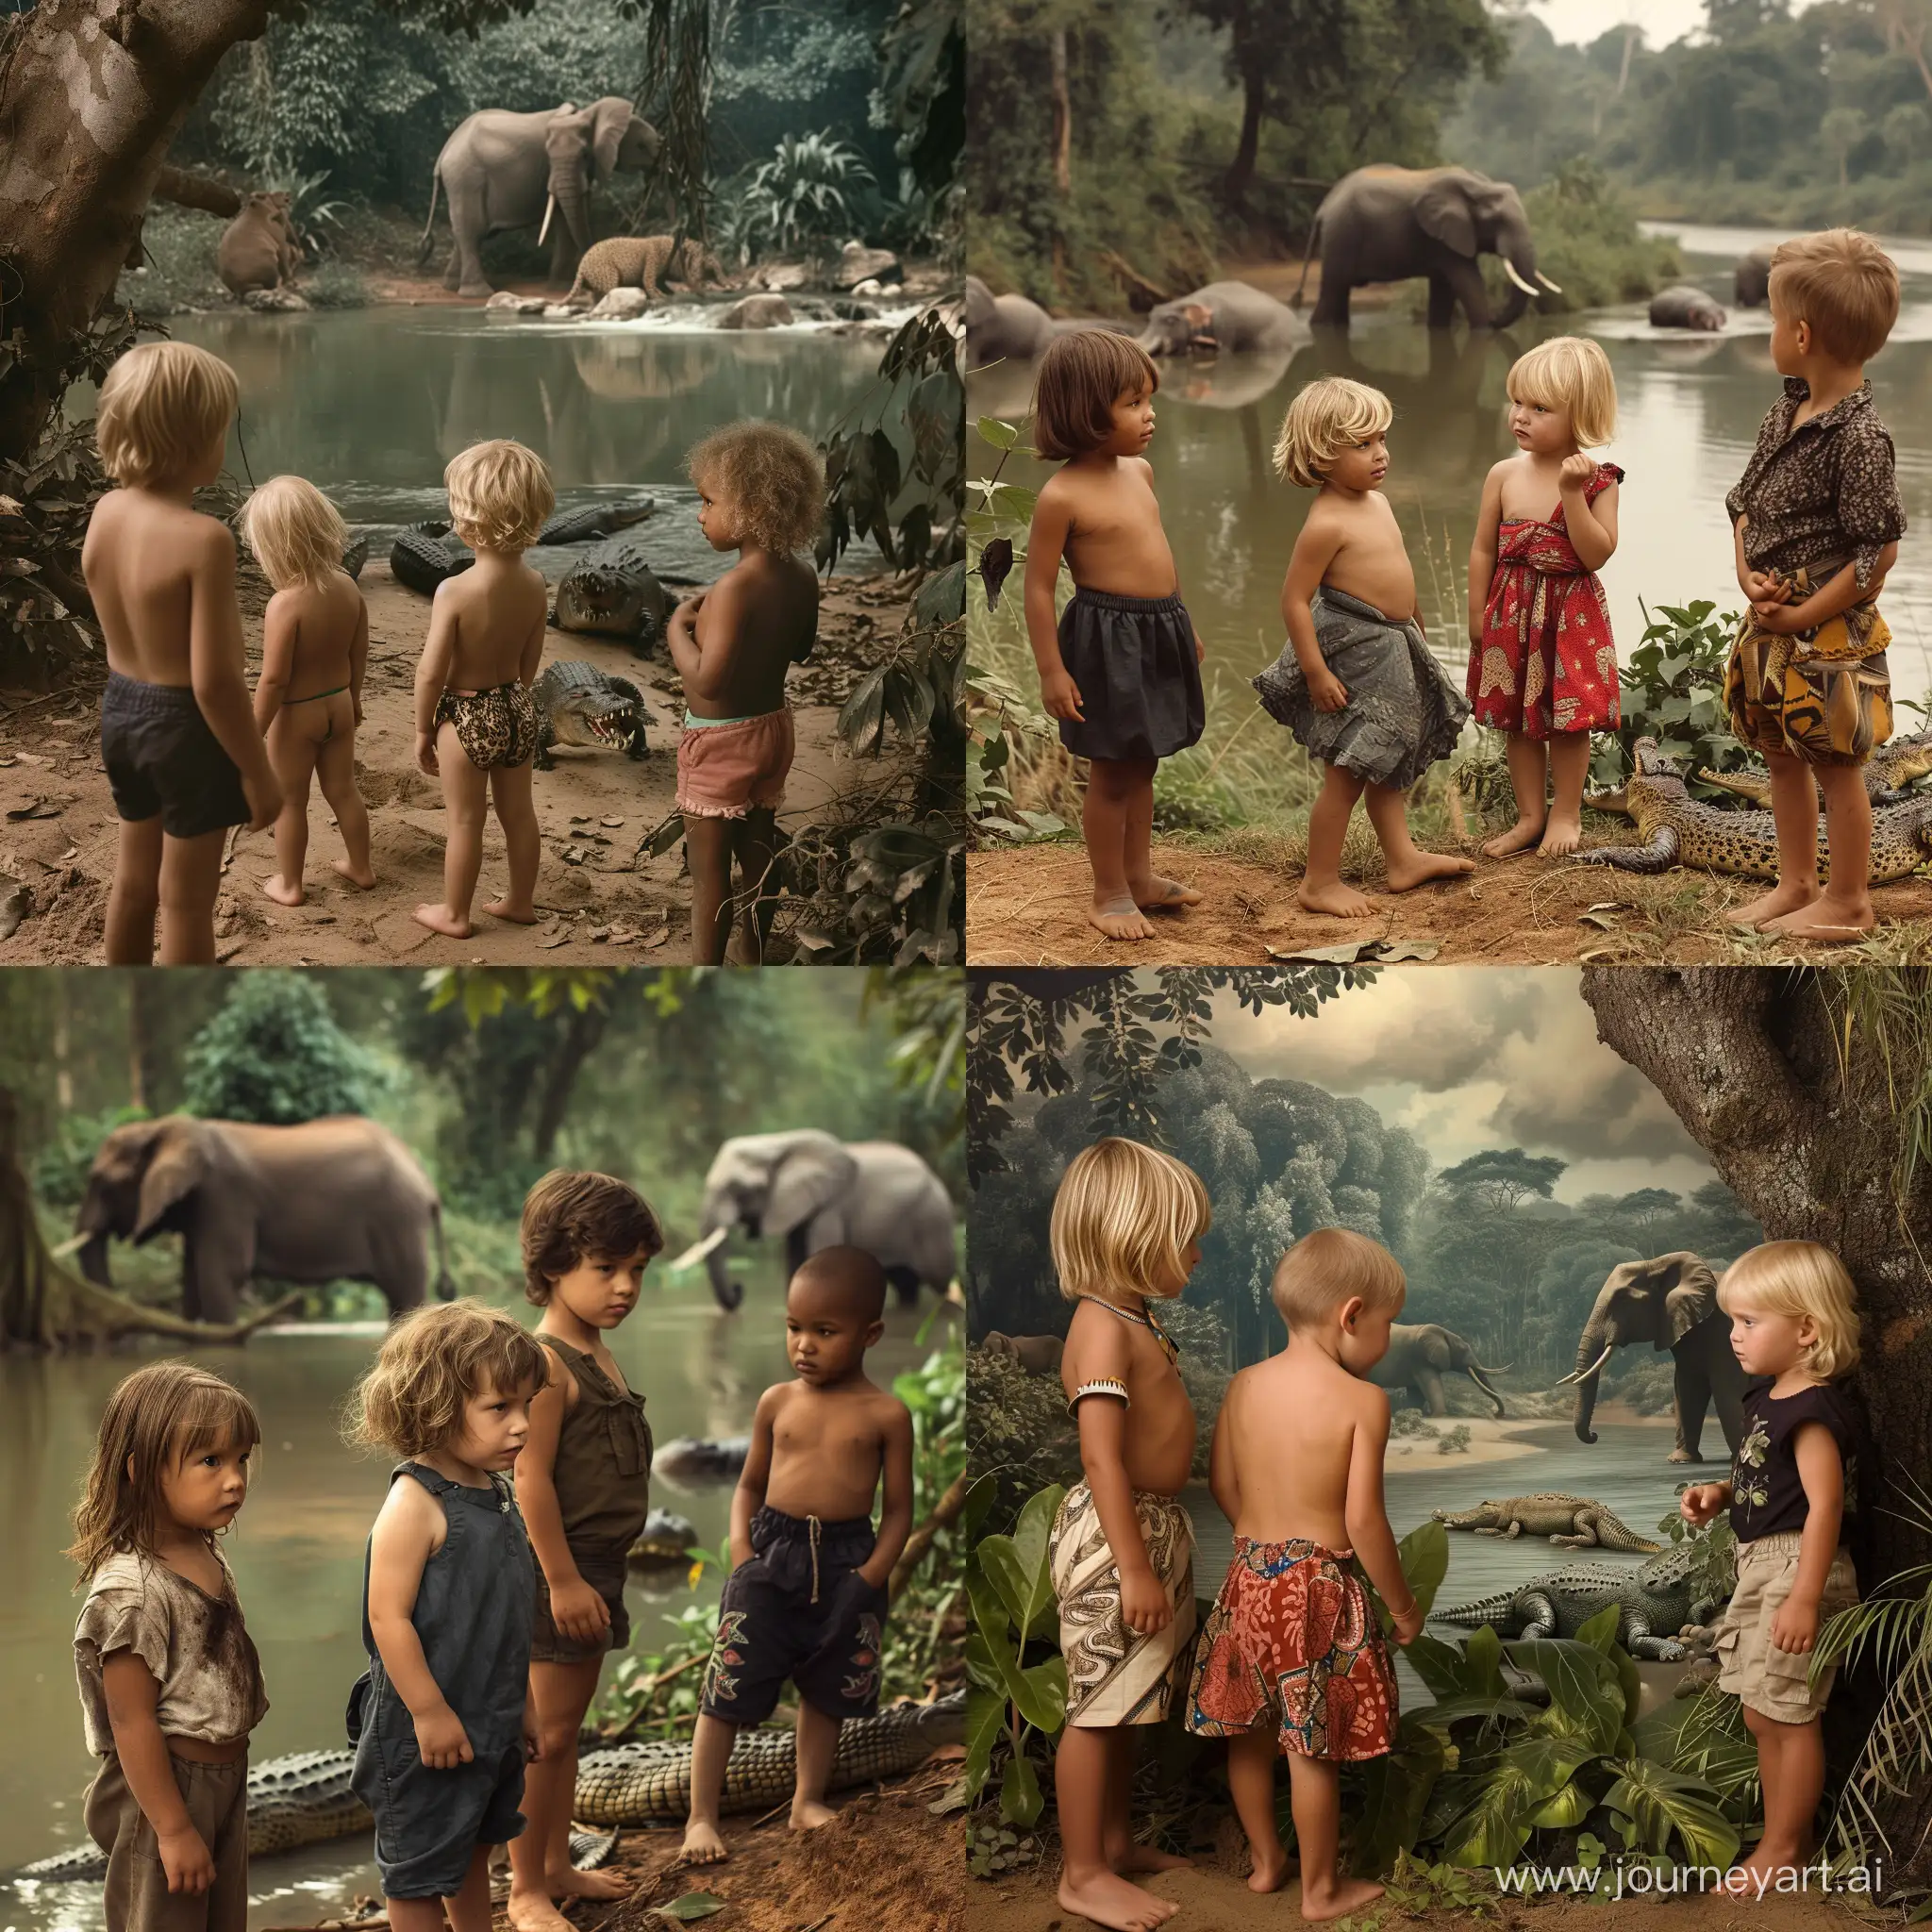 A photograph of three island children alongside Bantu children, exploring the African jungle barefoot. Curious and cautious expressions as they observe elephants and leopards from a distance. A serene river in the scene, with crocodiles and hippos lounging. Created Using: exploration theme, cautious expressions, distant wildlife, serene river backdrop, natural jungle environment, childlike wonder, wildlife harmony, peaceful mood